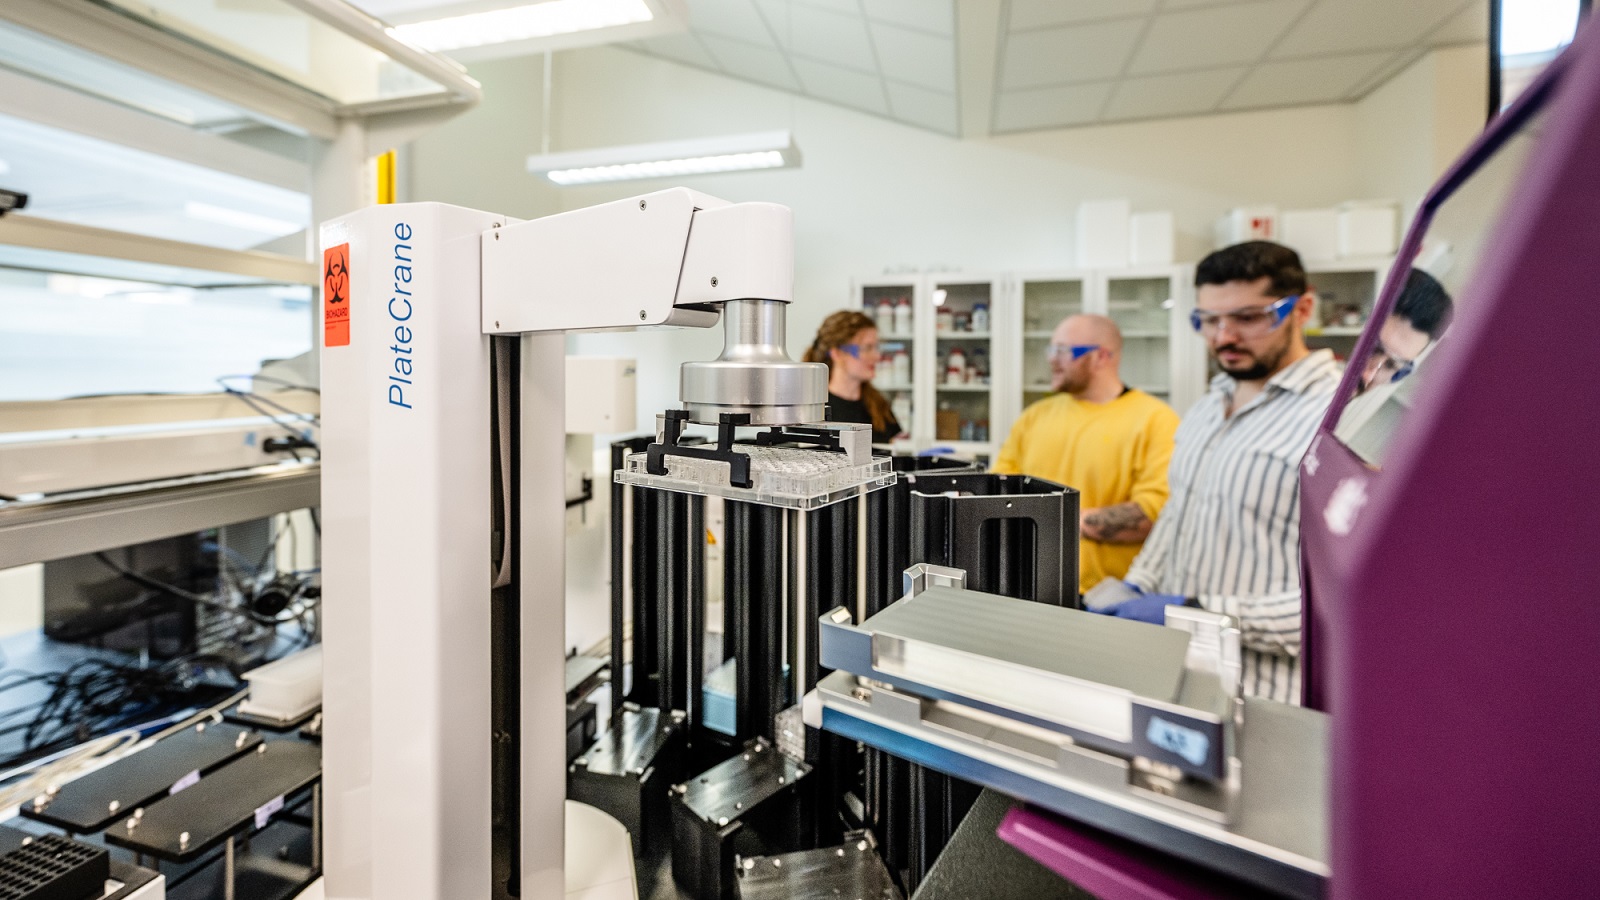 The Biosciences Automated Platform is one of the automated labs accelerating biological research. The system may help researchers unlock mysteries of microbiology or find new ways to treat drug-resistant bacterial infections.